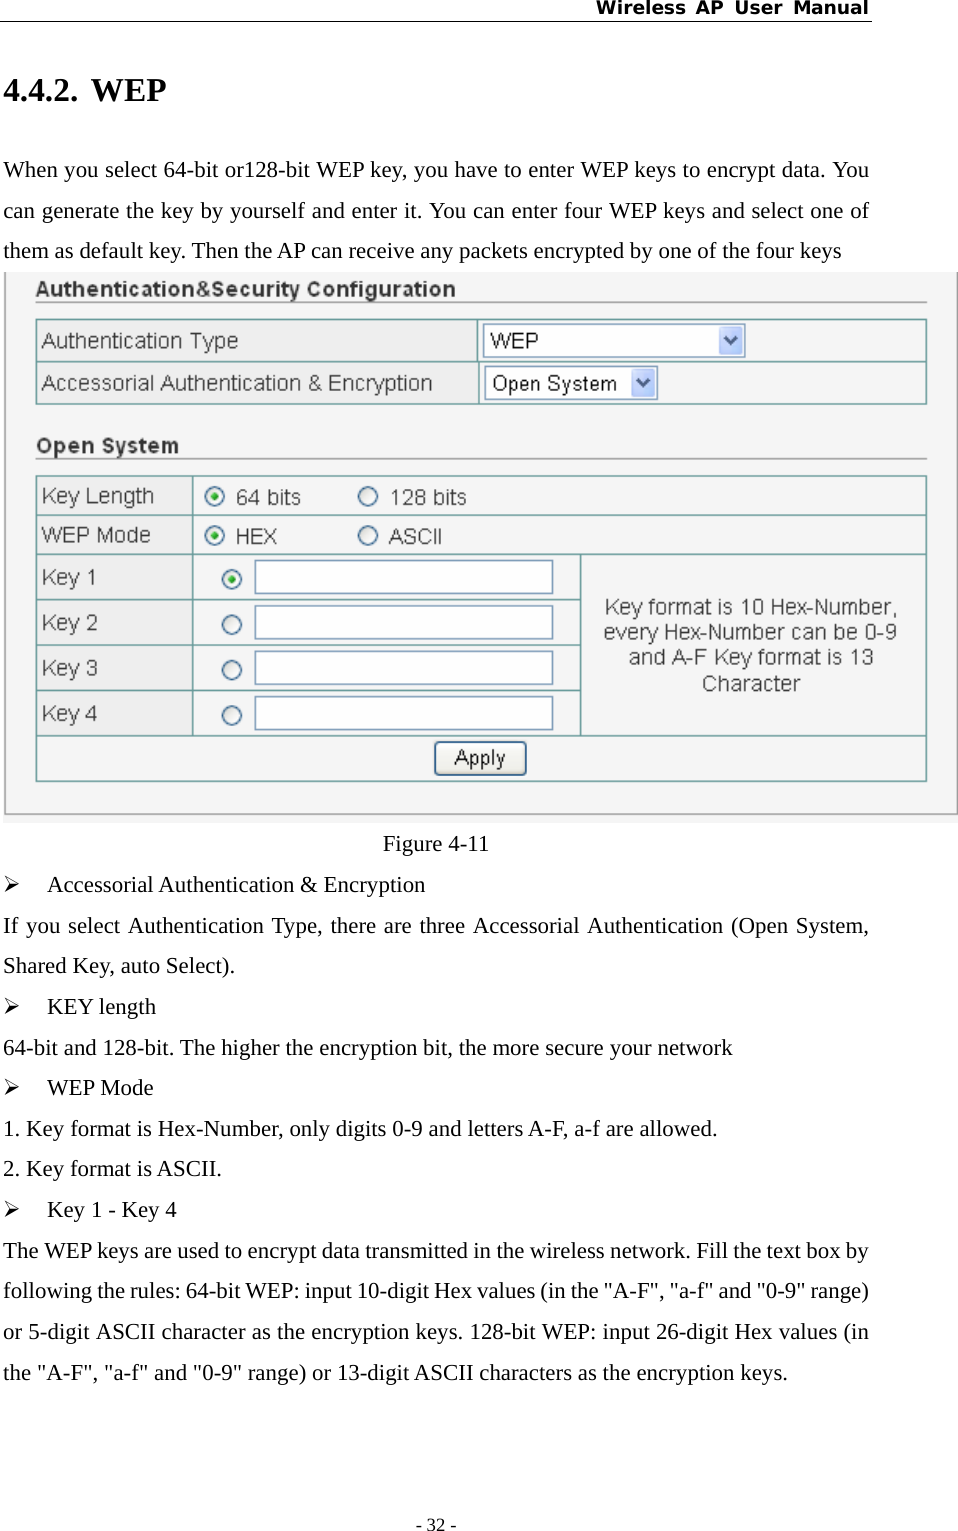 Wireless AP User Manual - 32 -  4.4.2. WEP When you select 64-bit or128-bit WEP key, you have to enter WEP keys to encrypt data. You can generate the key by yourself and enter it. You can enter four WEP keys and select one of them as default key. Then the AP can receive any packets encrypted by one of the four keys  Figure 4-11 ¾ Accessorial Authentication &amp; Encryption If you select Authentication Type, there are three Accessorial Authentication (Open System, Shared Key, auto Select). ¾ KEY length 64-bit and 128-bit. The higher the encryption bit, the more secure your network   ¾ WEP Mode 1. Key format is Hex-Number, only digits 0-9 and letters A-F, a-f are allowed.   2. Key format is ASCII. ¾ Key 1 - Key 4 The WEP keys are used to encrypt data transmitted in the wireless network. Fill the text box by following the rules: 64-bit WEP: input 10-digit Hex values (in the &quot;A-F&quot;, &quot;a-f&quot; and &quot;0-9&quot; range) or 5-digit ASCII character as the encryption keys. 128-bit WEP: input 26-digit Hex values (in the &quot;A-F&quot;, &quot;a-f&quot; and &quot;0-9&quot; range) or 13-digit ASCII characters as the encryption keys.   